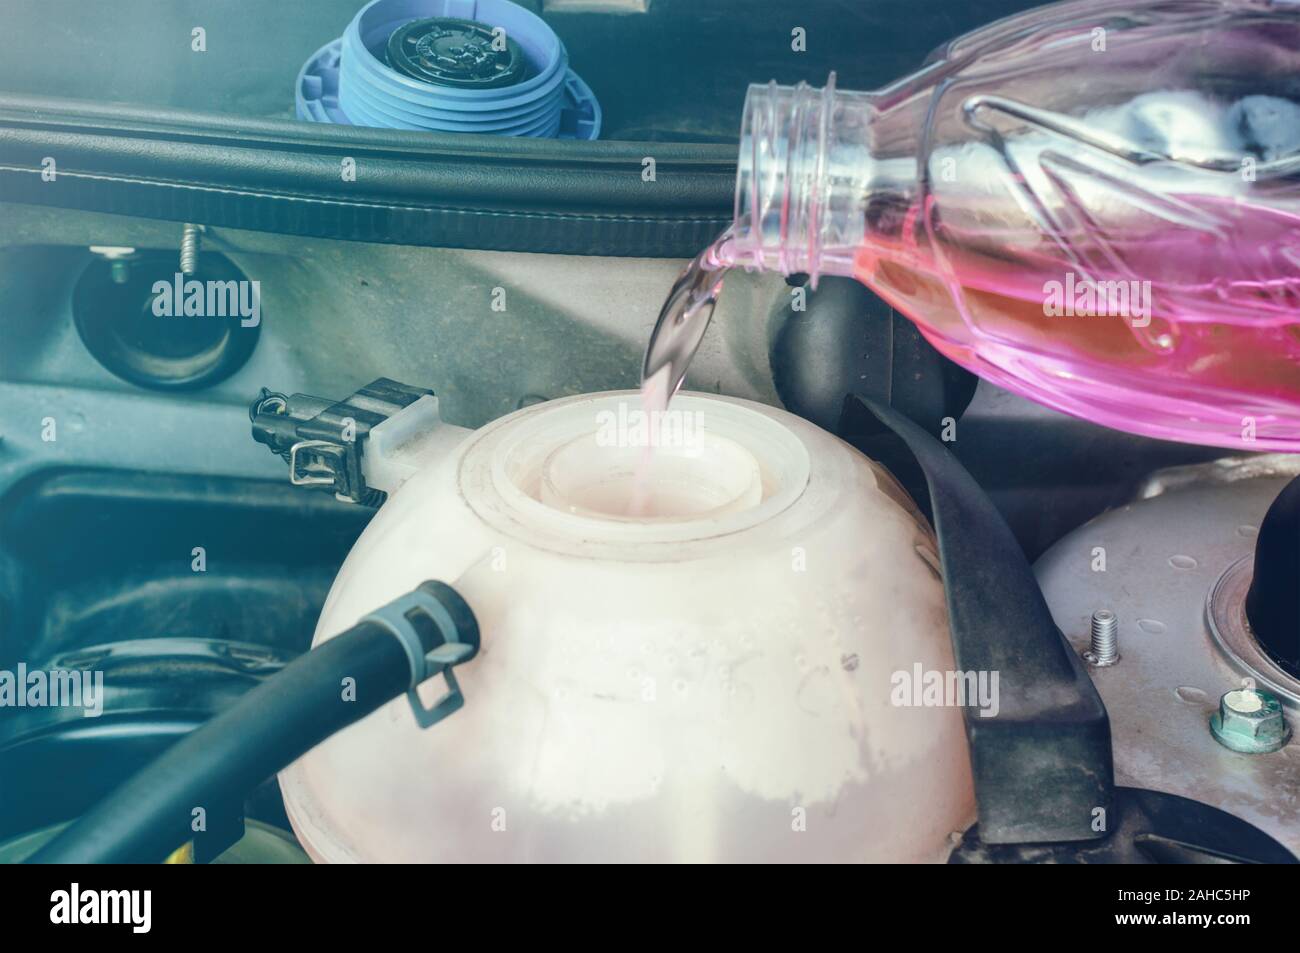 Car engine filling with coolant Stock Photo